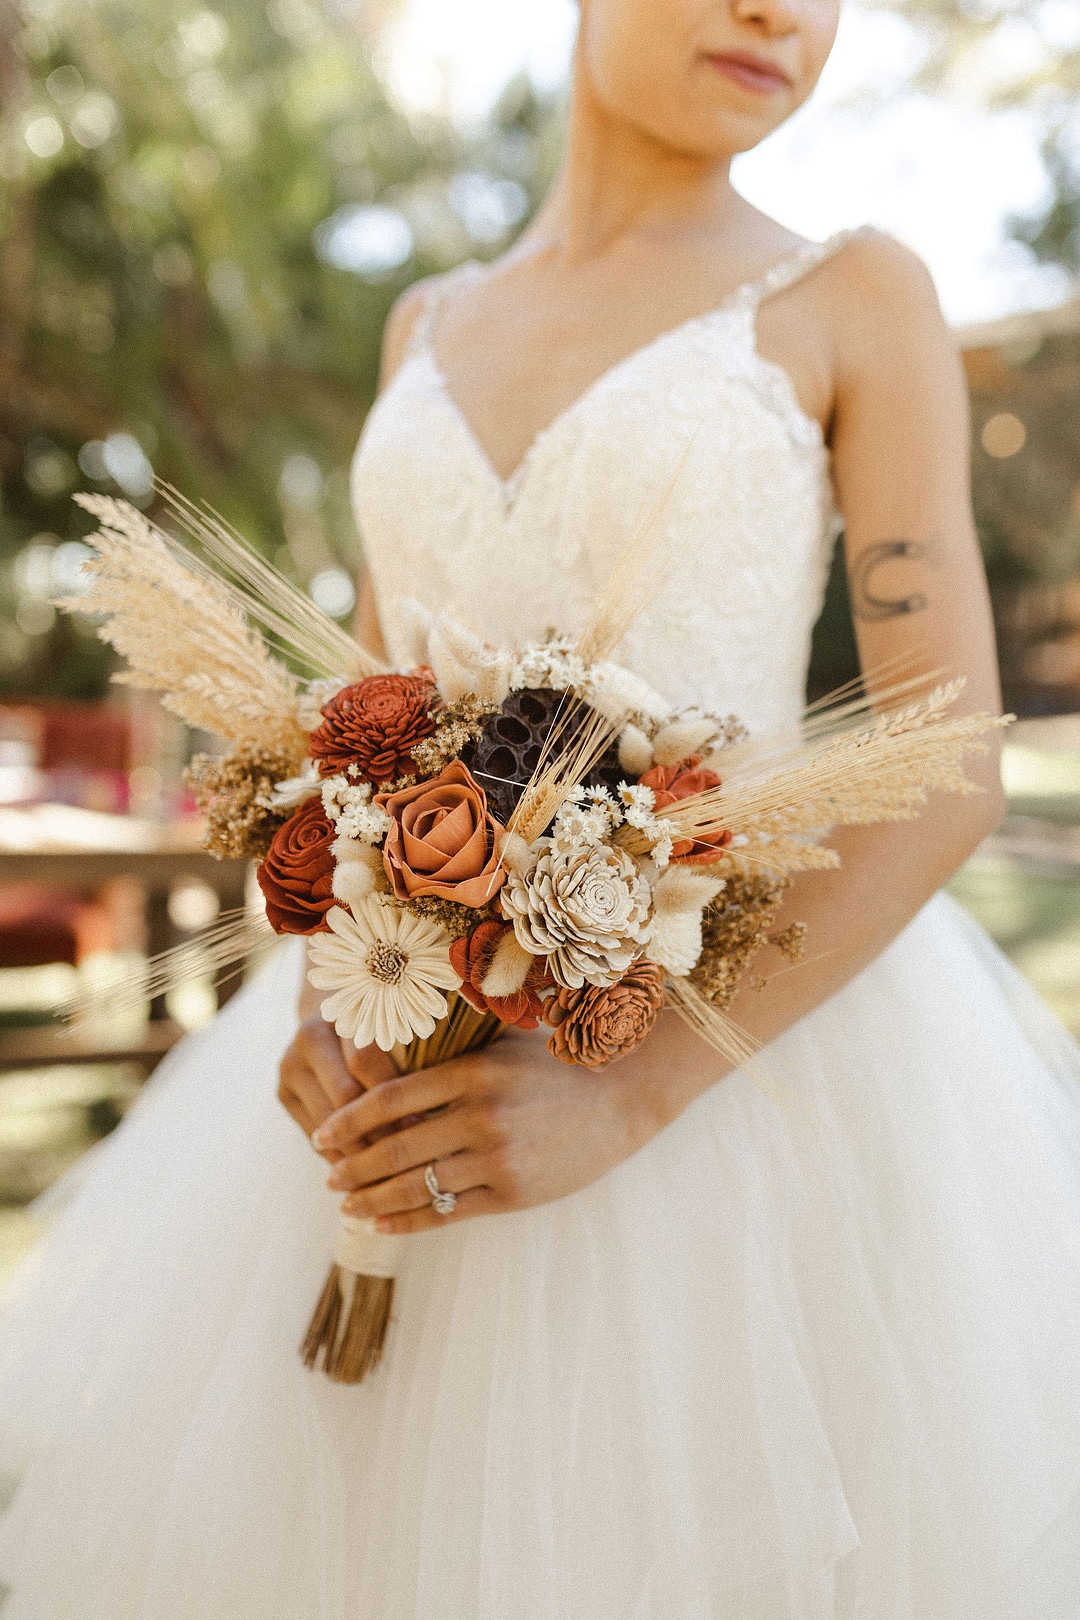 the bride holding her bouquet with neutral color tones